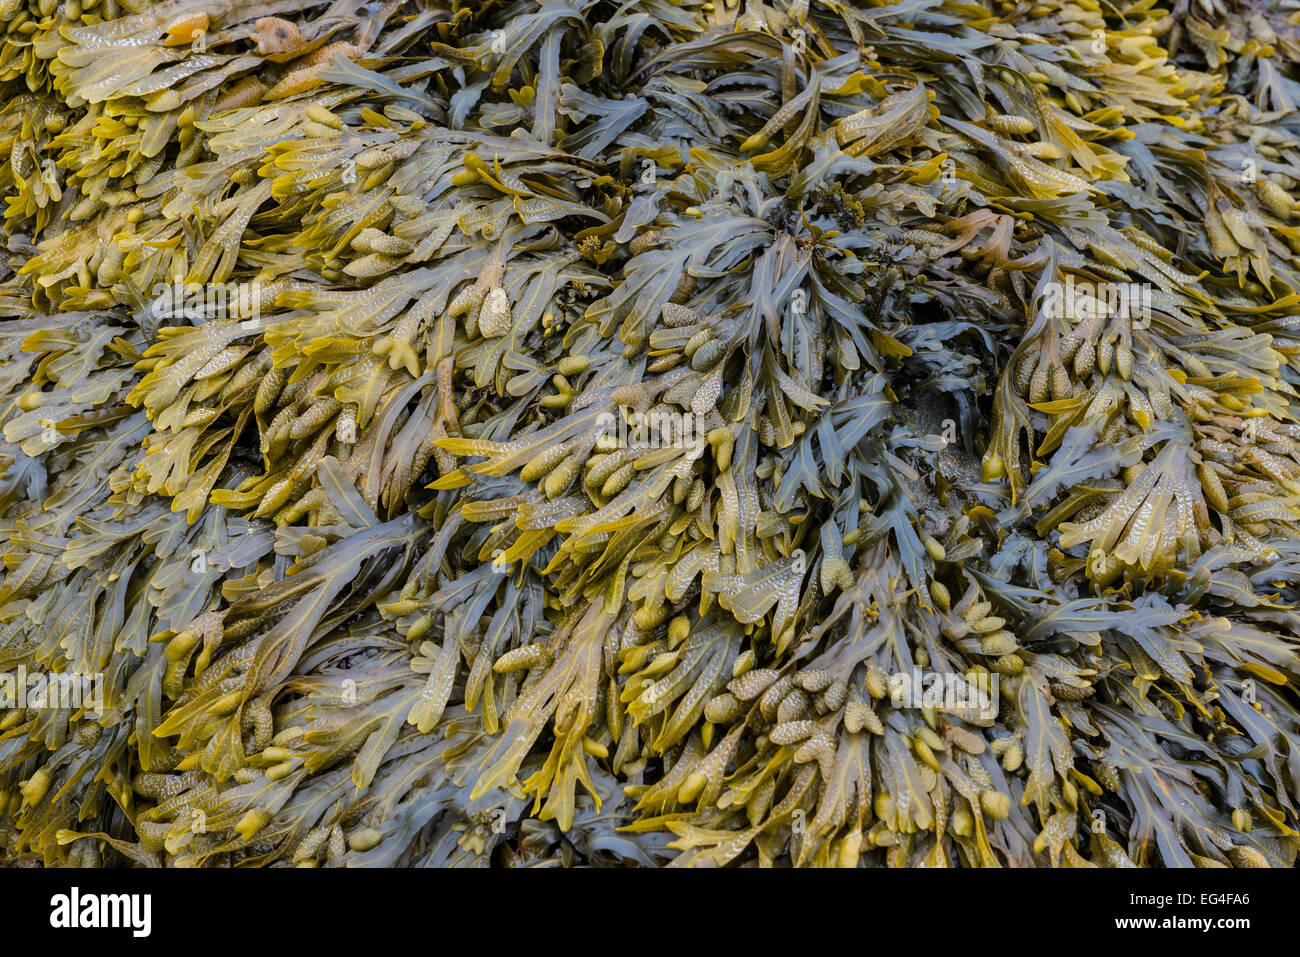 Brown and green seaweed at the shore of the sea. Stock Photo